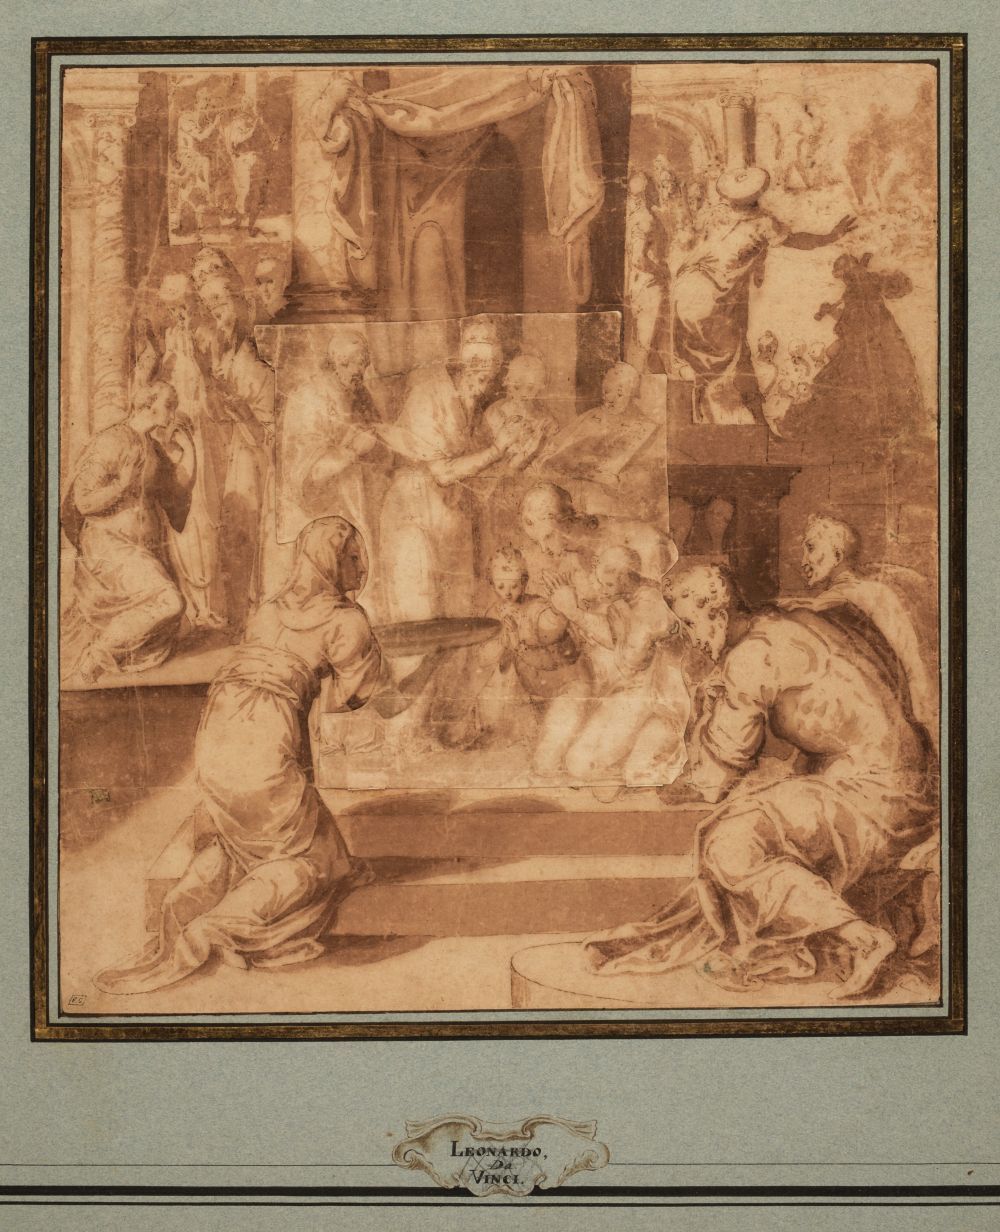 Guerra (Giovanni, circa 1540-1618). Scenes from the life of the Pope, pen and brown ink